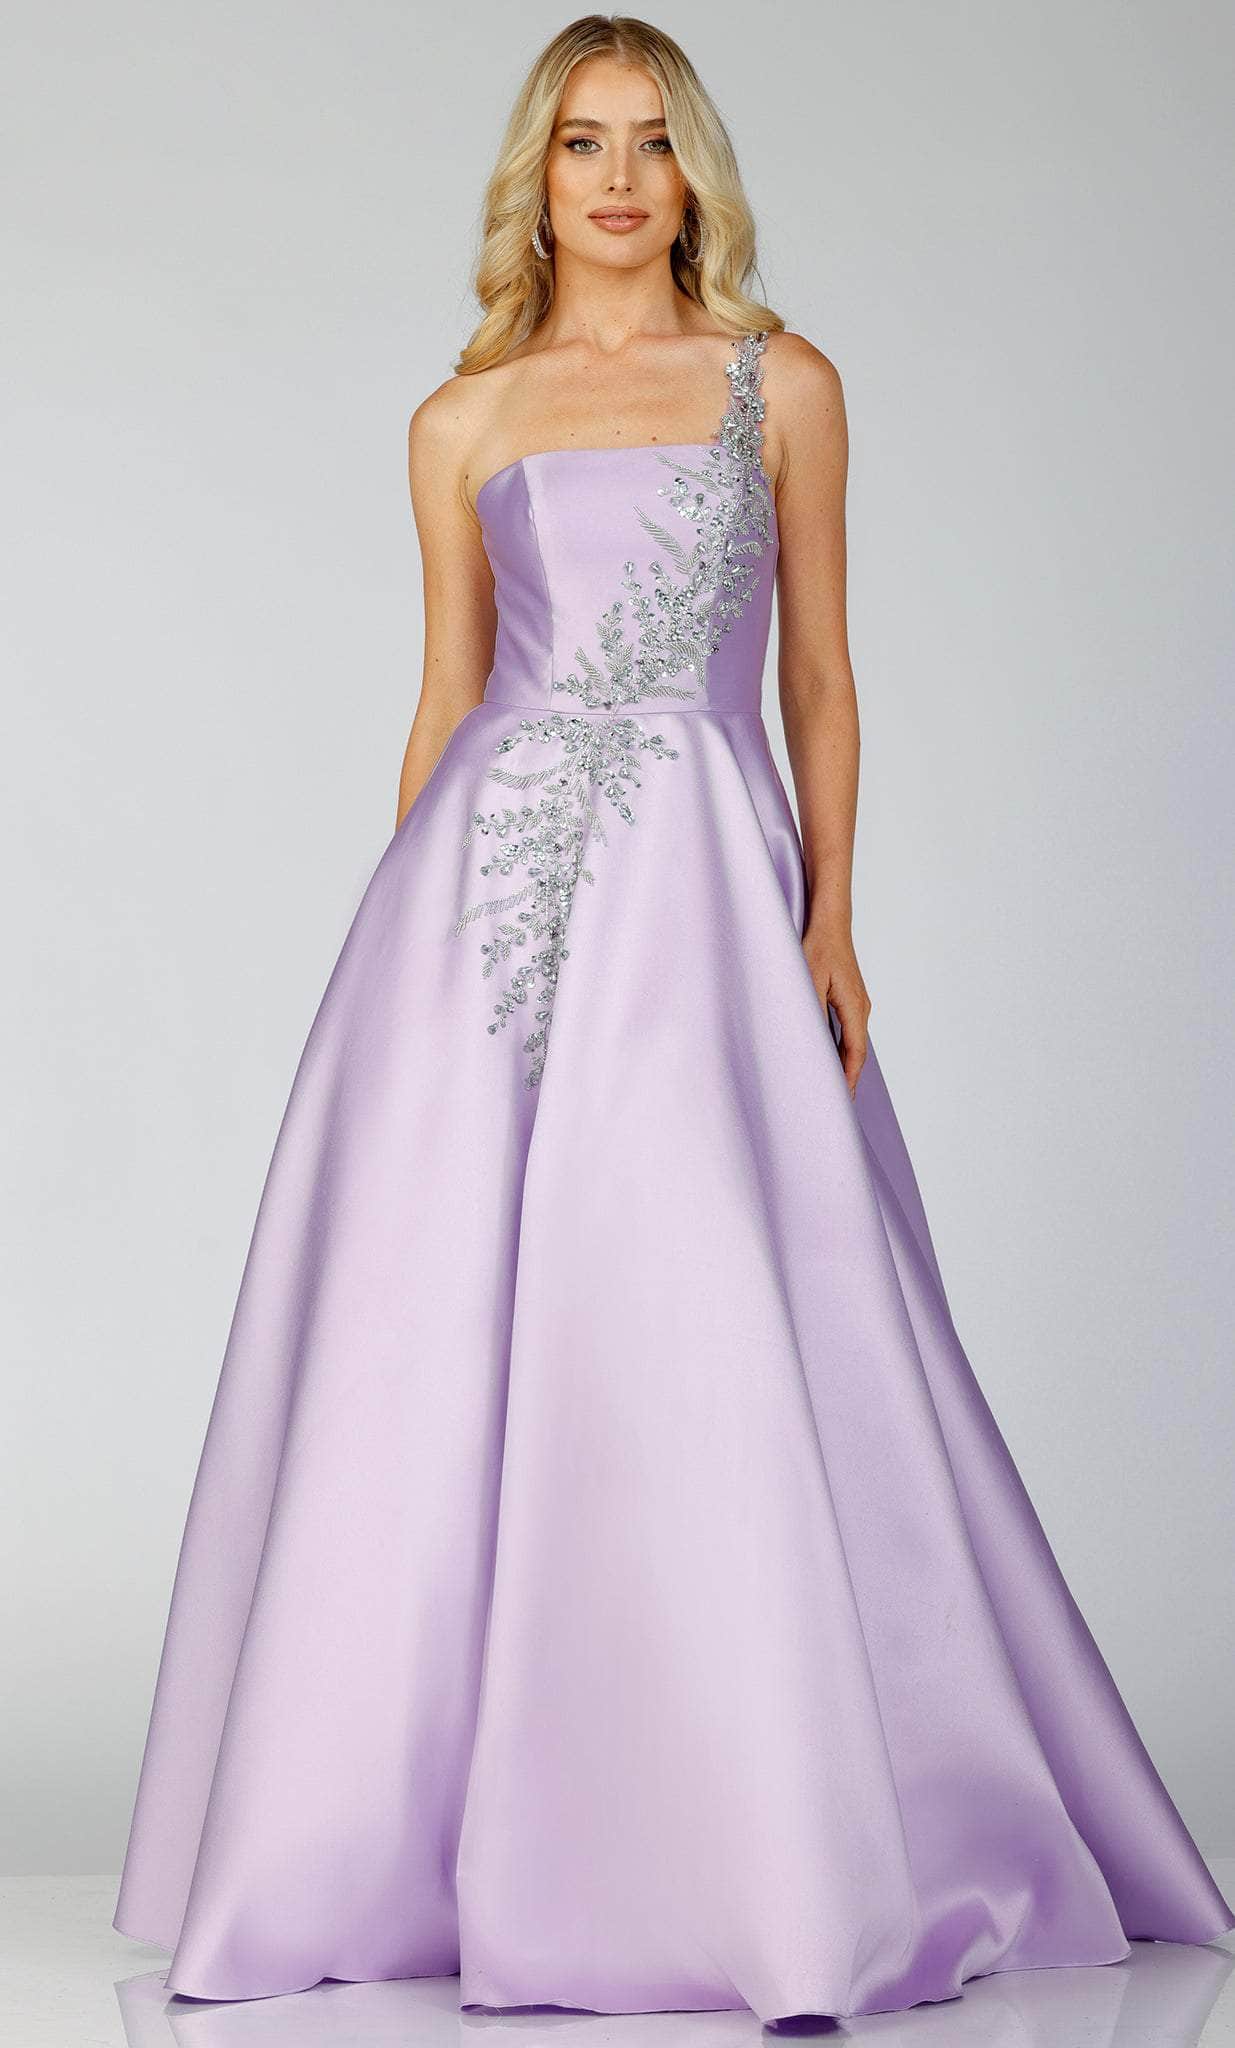 Image of Terani Couture 231P0175 - Embellished One Sleeve Prom Gown